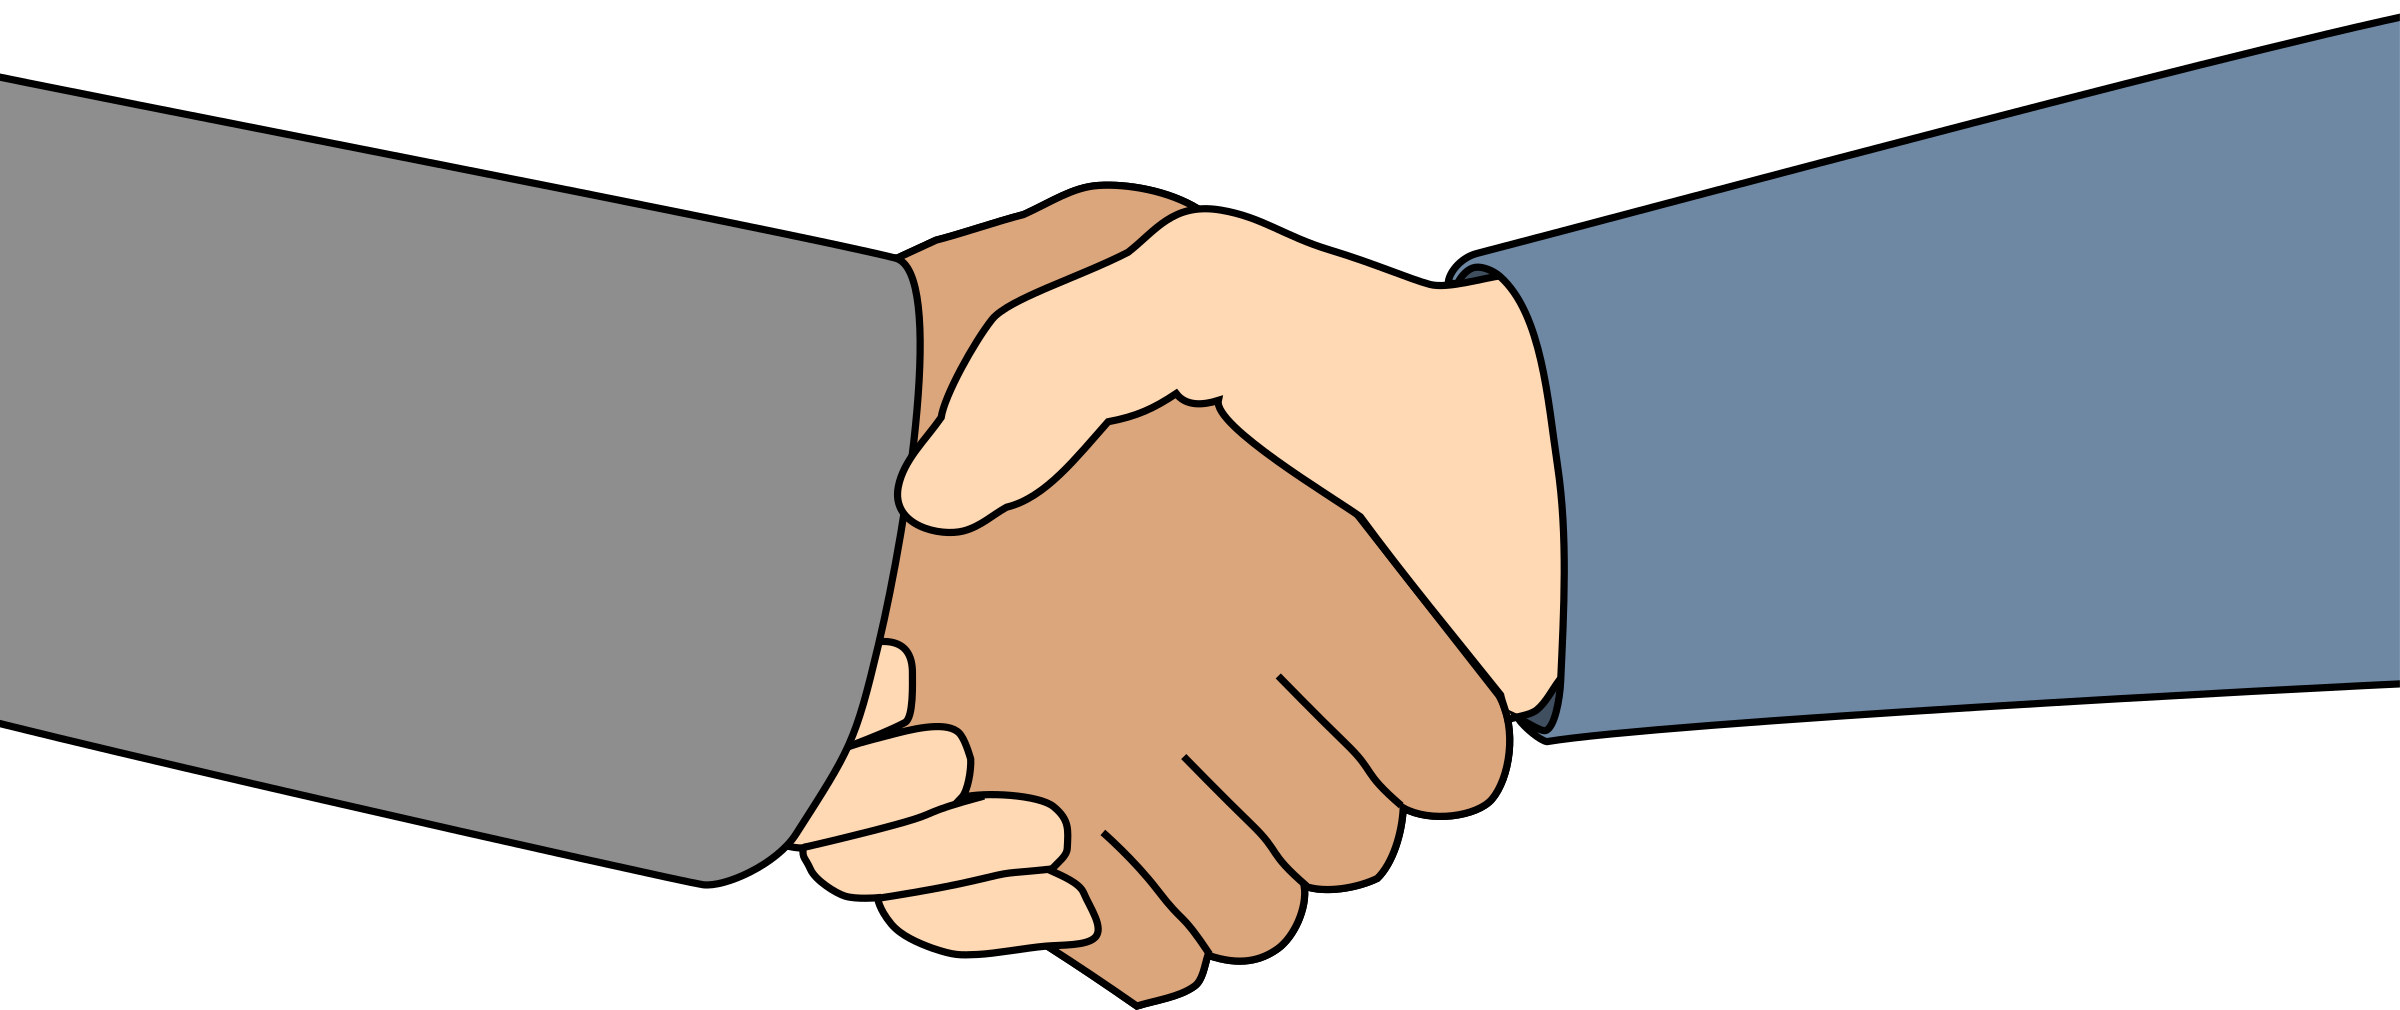 Shaking Hands Drawing Clipart